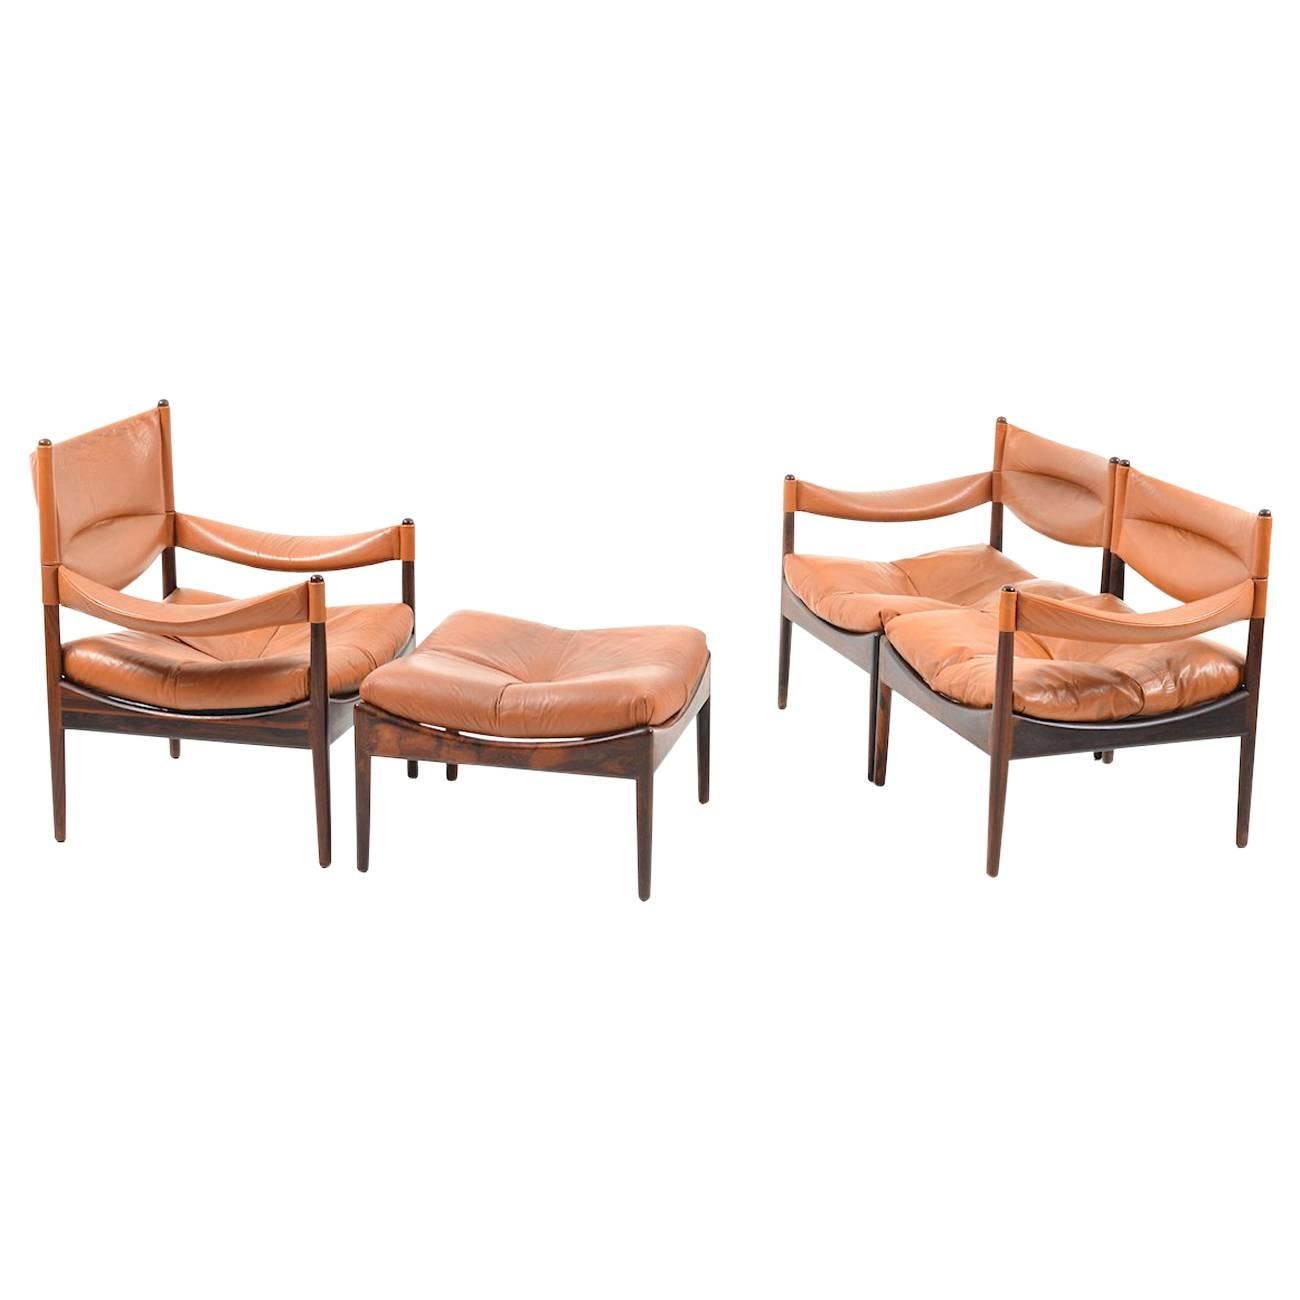 Two Seats Sofa and Lounge Chair with Ottoman in Rosewood by Kristian Vedel